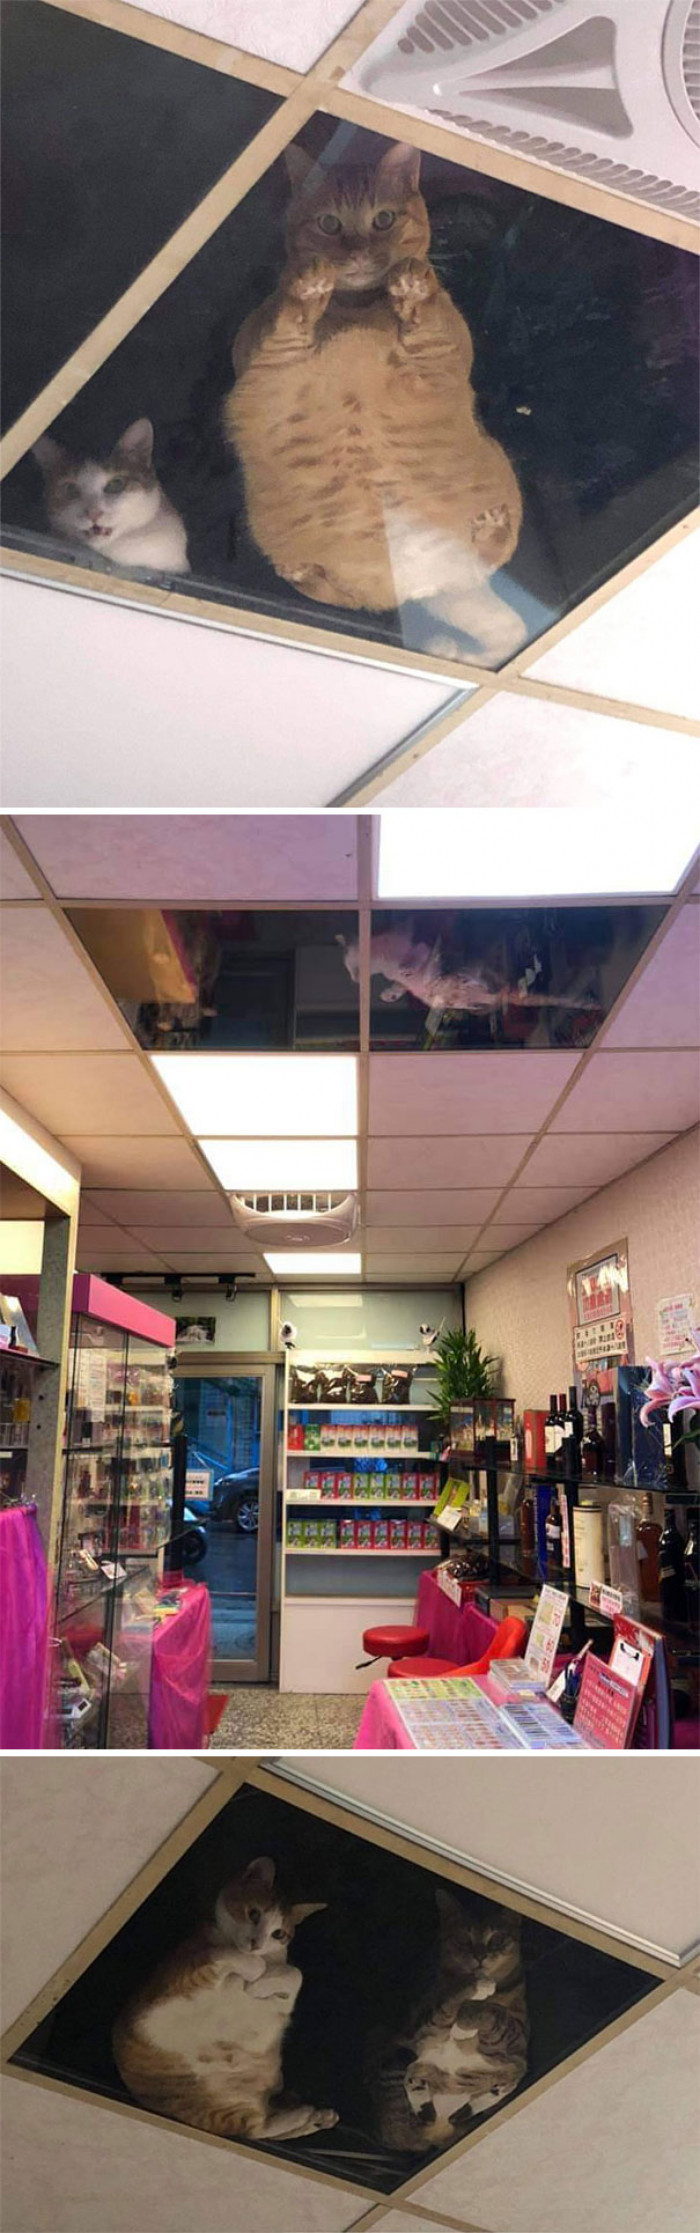 5. This shop owner installed glass ceilings so the cats can look down on him and it's cool for the cats but also terrifying at the same time!